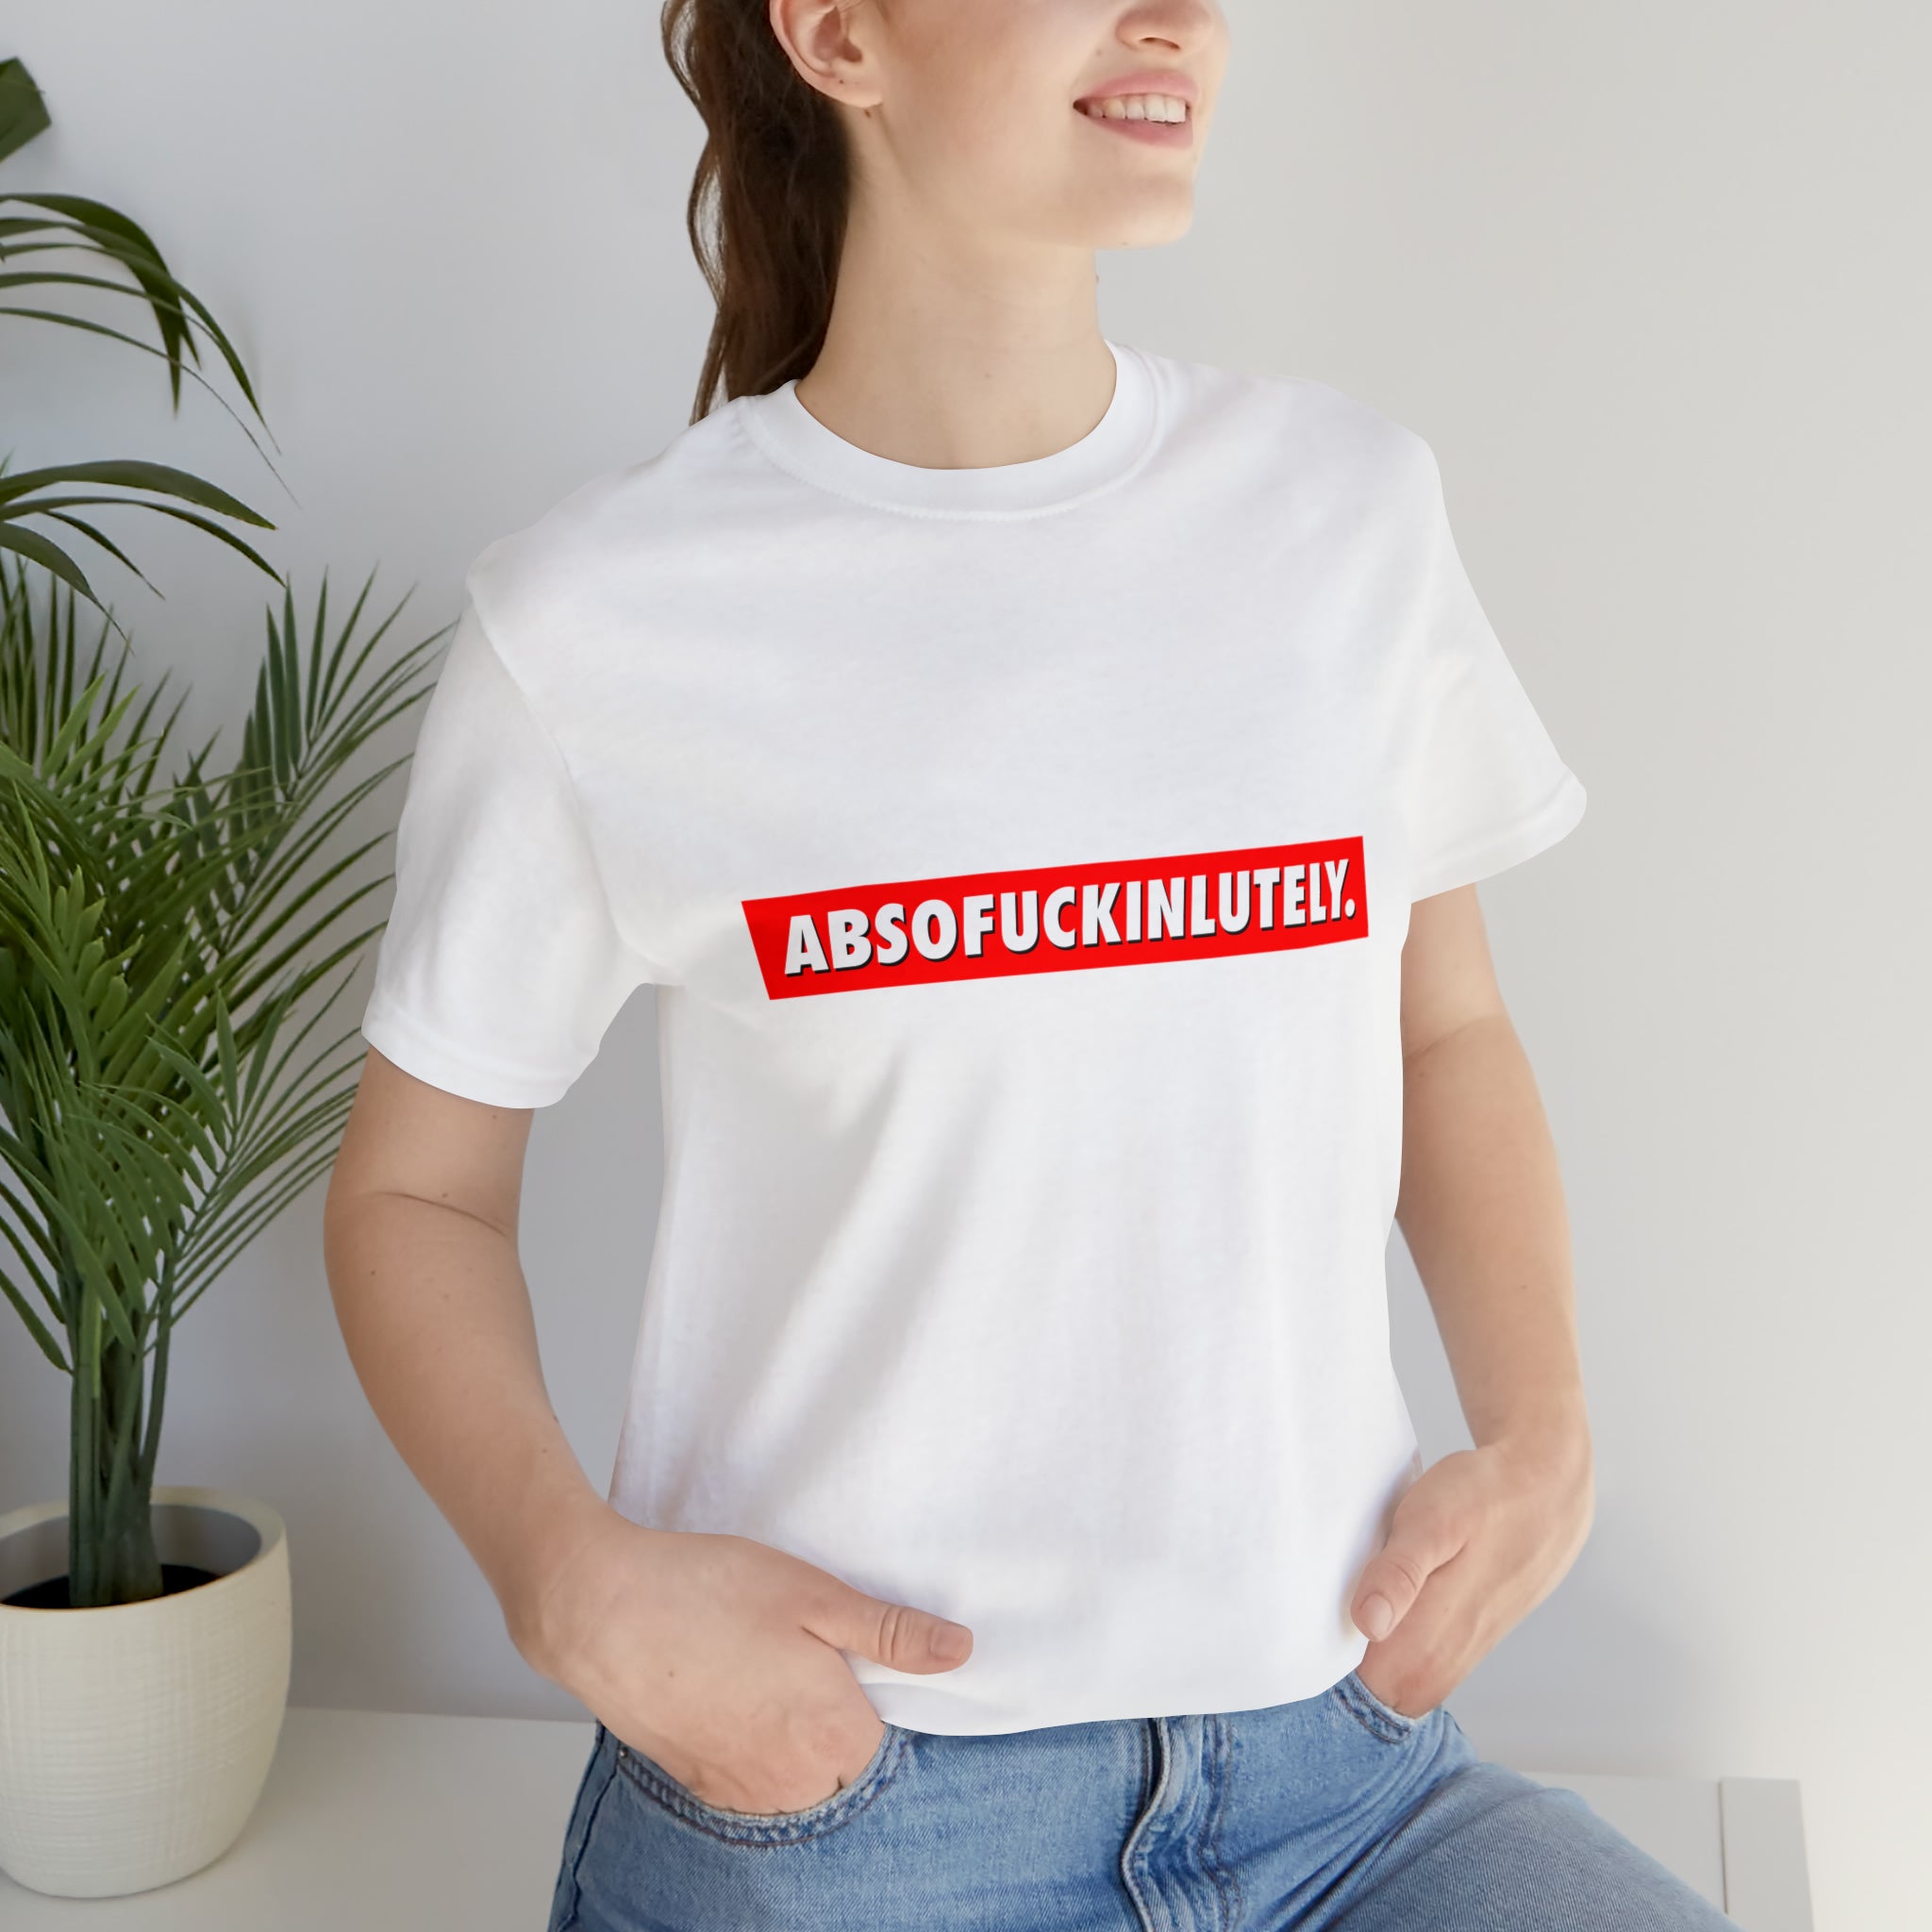 An eye-catching woman in a bold white Absofuckinlutely T-Shirt.